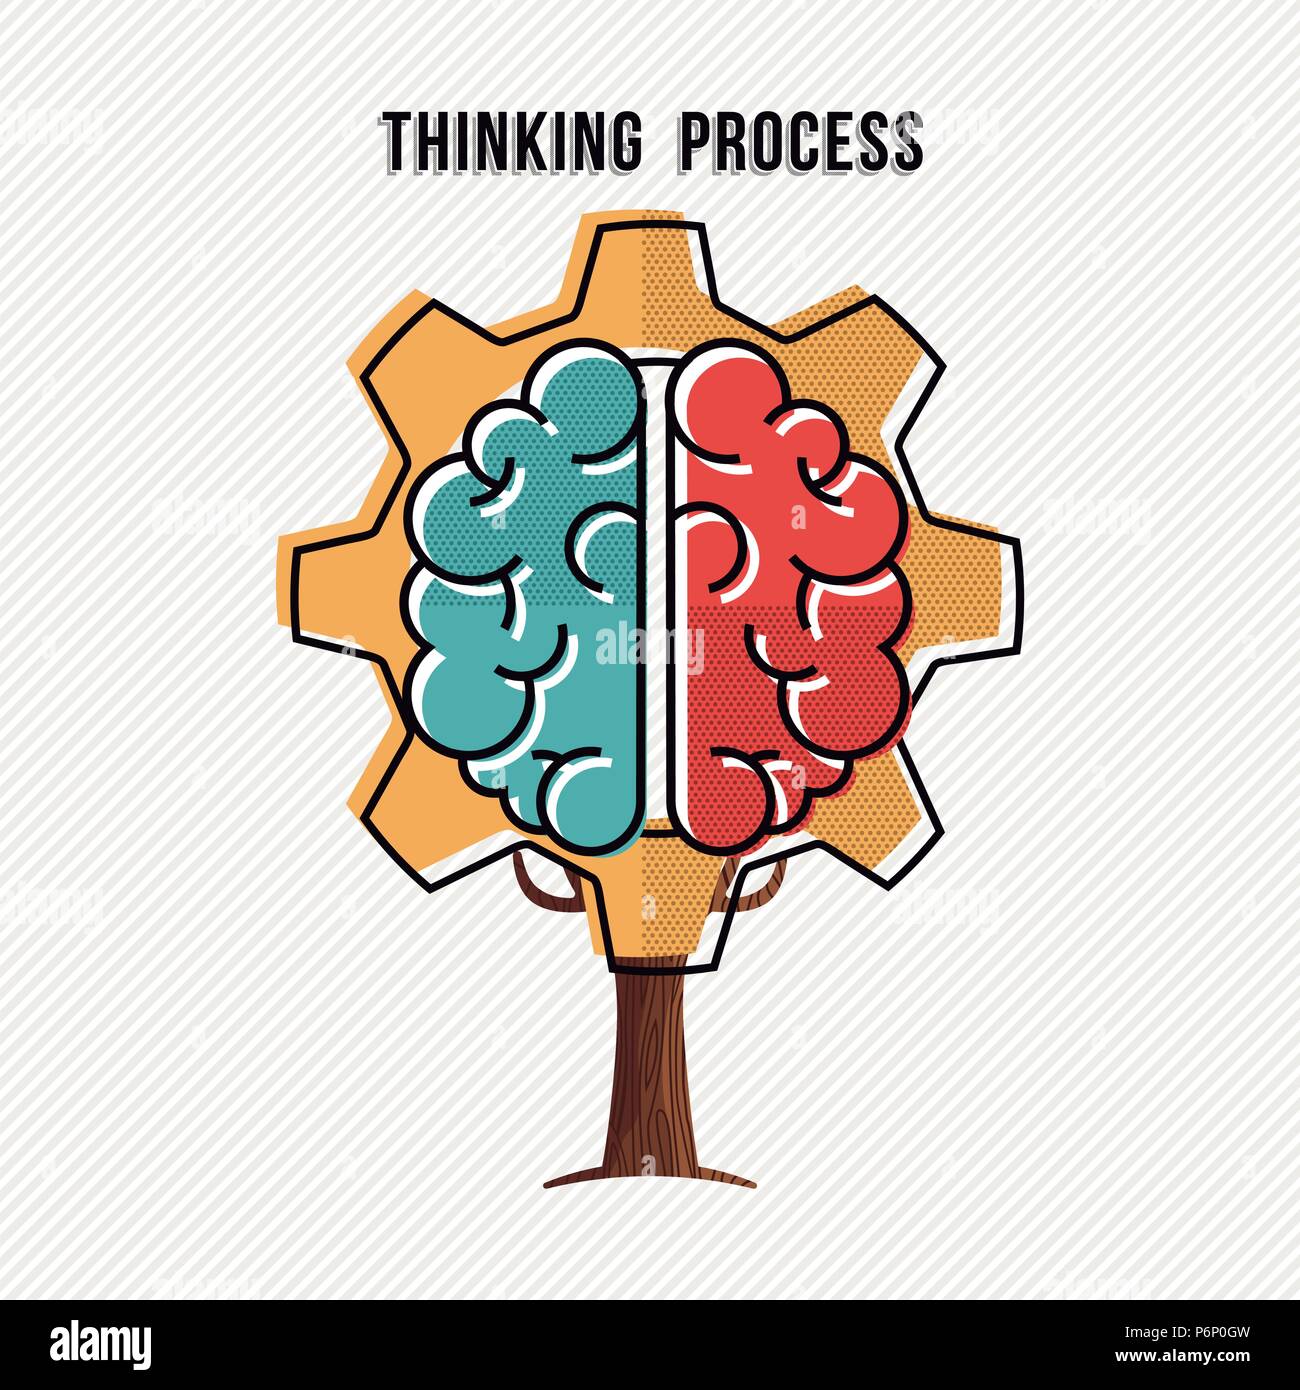 Thinking process concept illustration with human brain and gear wheel design, development of ideas in business. EPS10 vector. Stock Vector